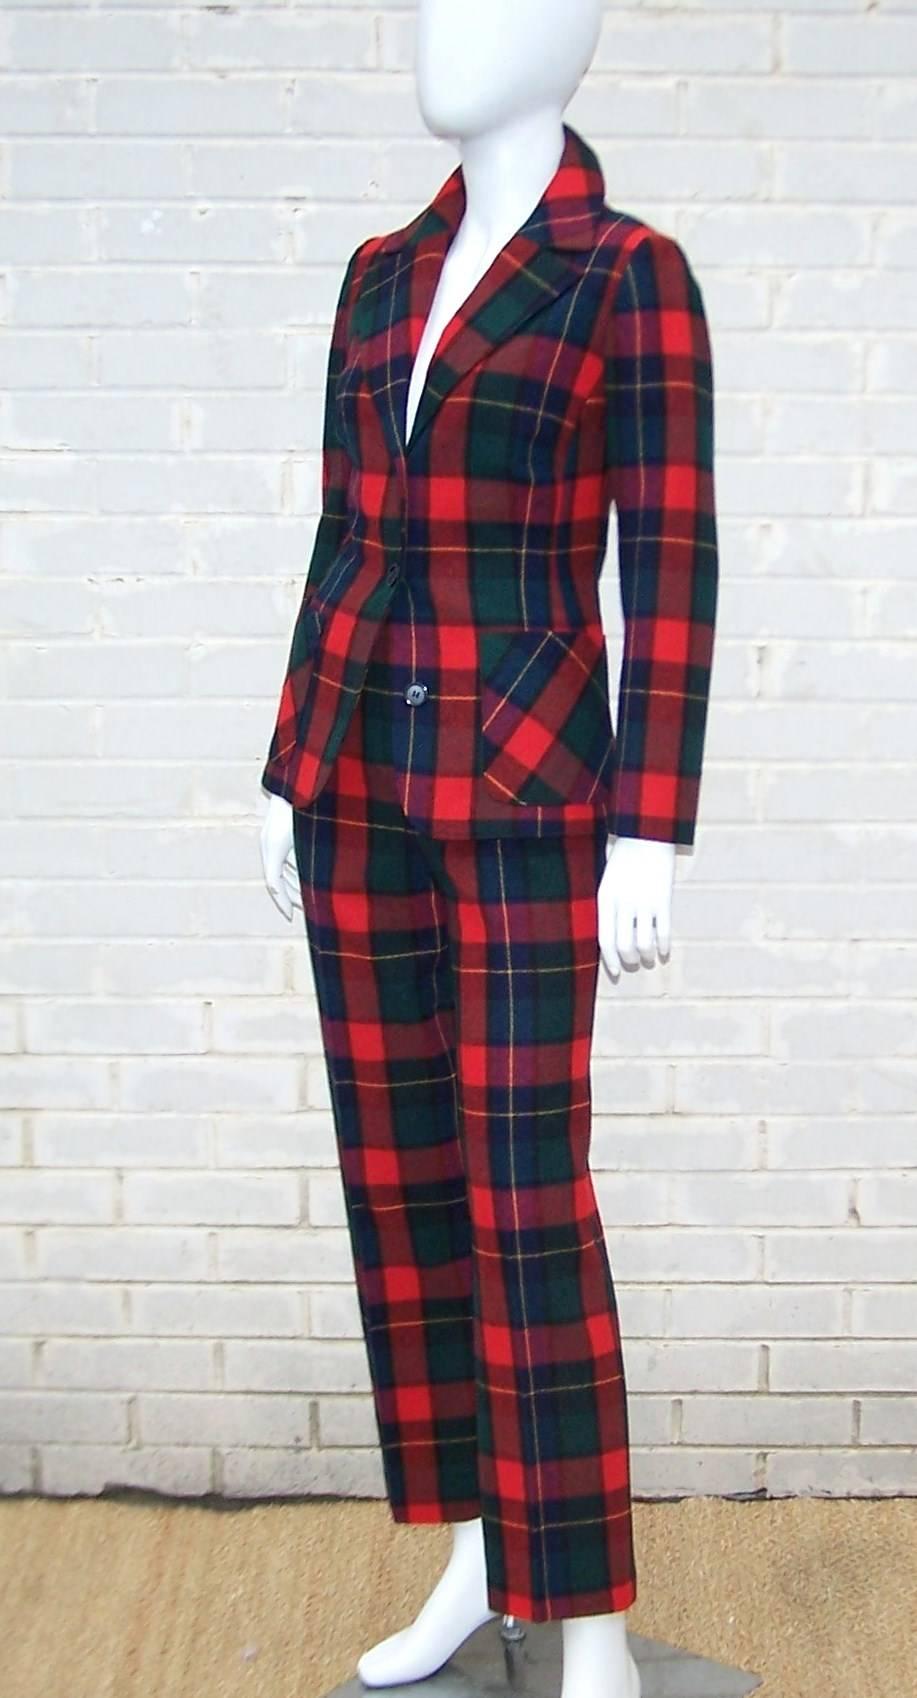 Take this classic plaid 100% wool pant suit by Pendleton Mills and turn it Ralph Lauren all-American or Vivienne Westwood London punk with accessories and attitude.  Both pieces are fun worn as separates or together for a tartan eyeful.  The jacket